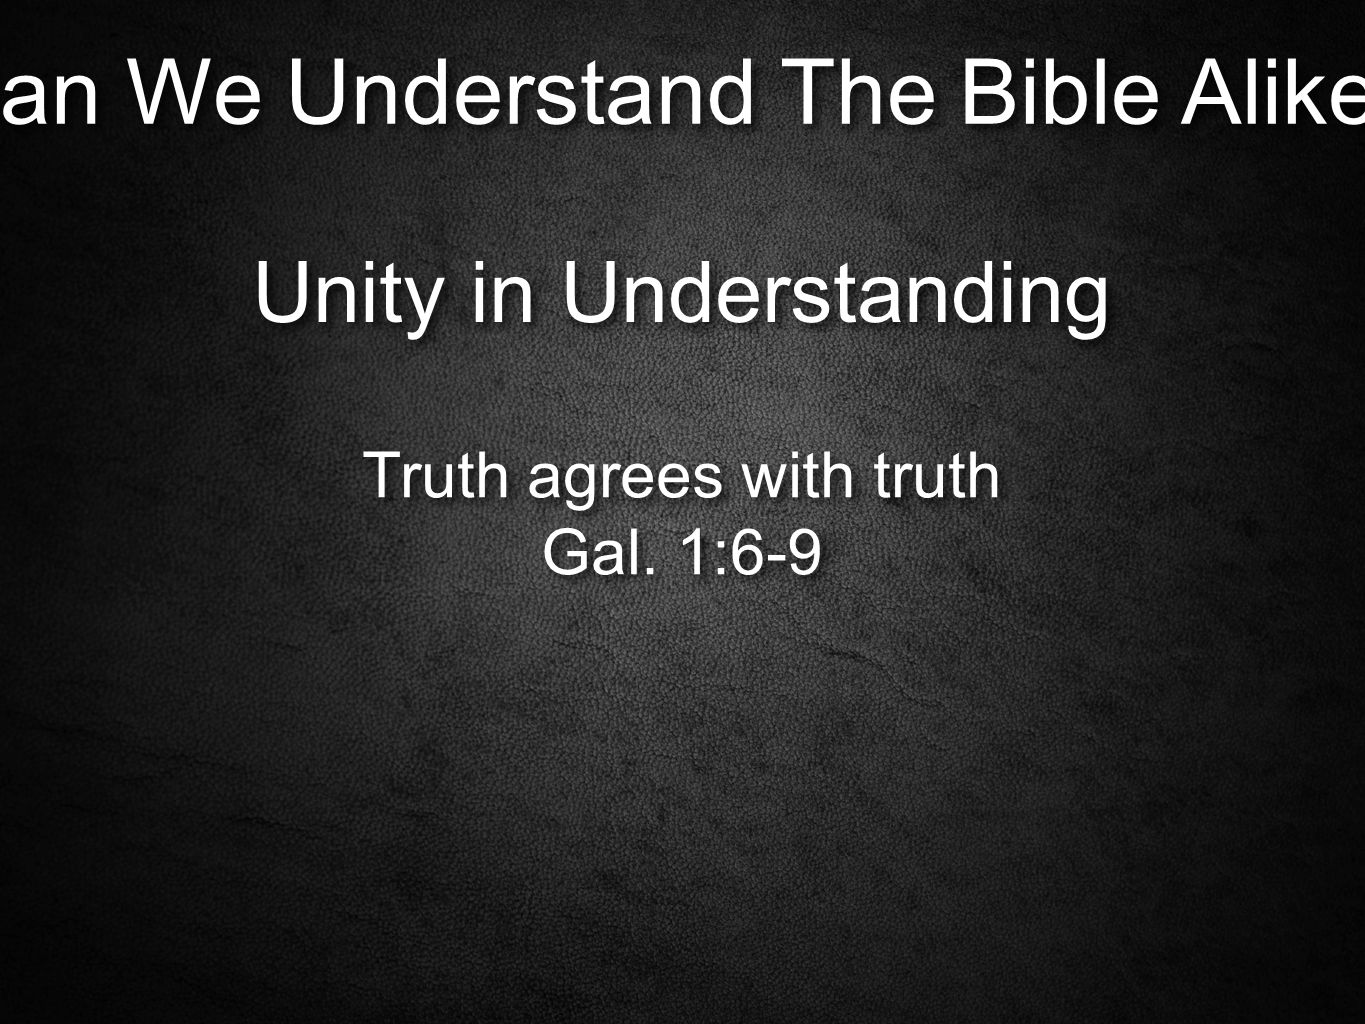 Can We Understand The Bible Alike. Unity in Understanding Truth agrees with truth Gal.